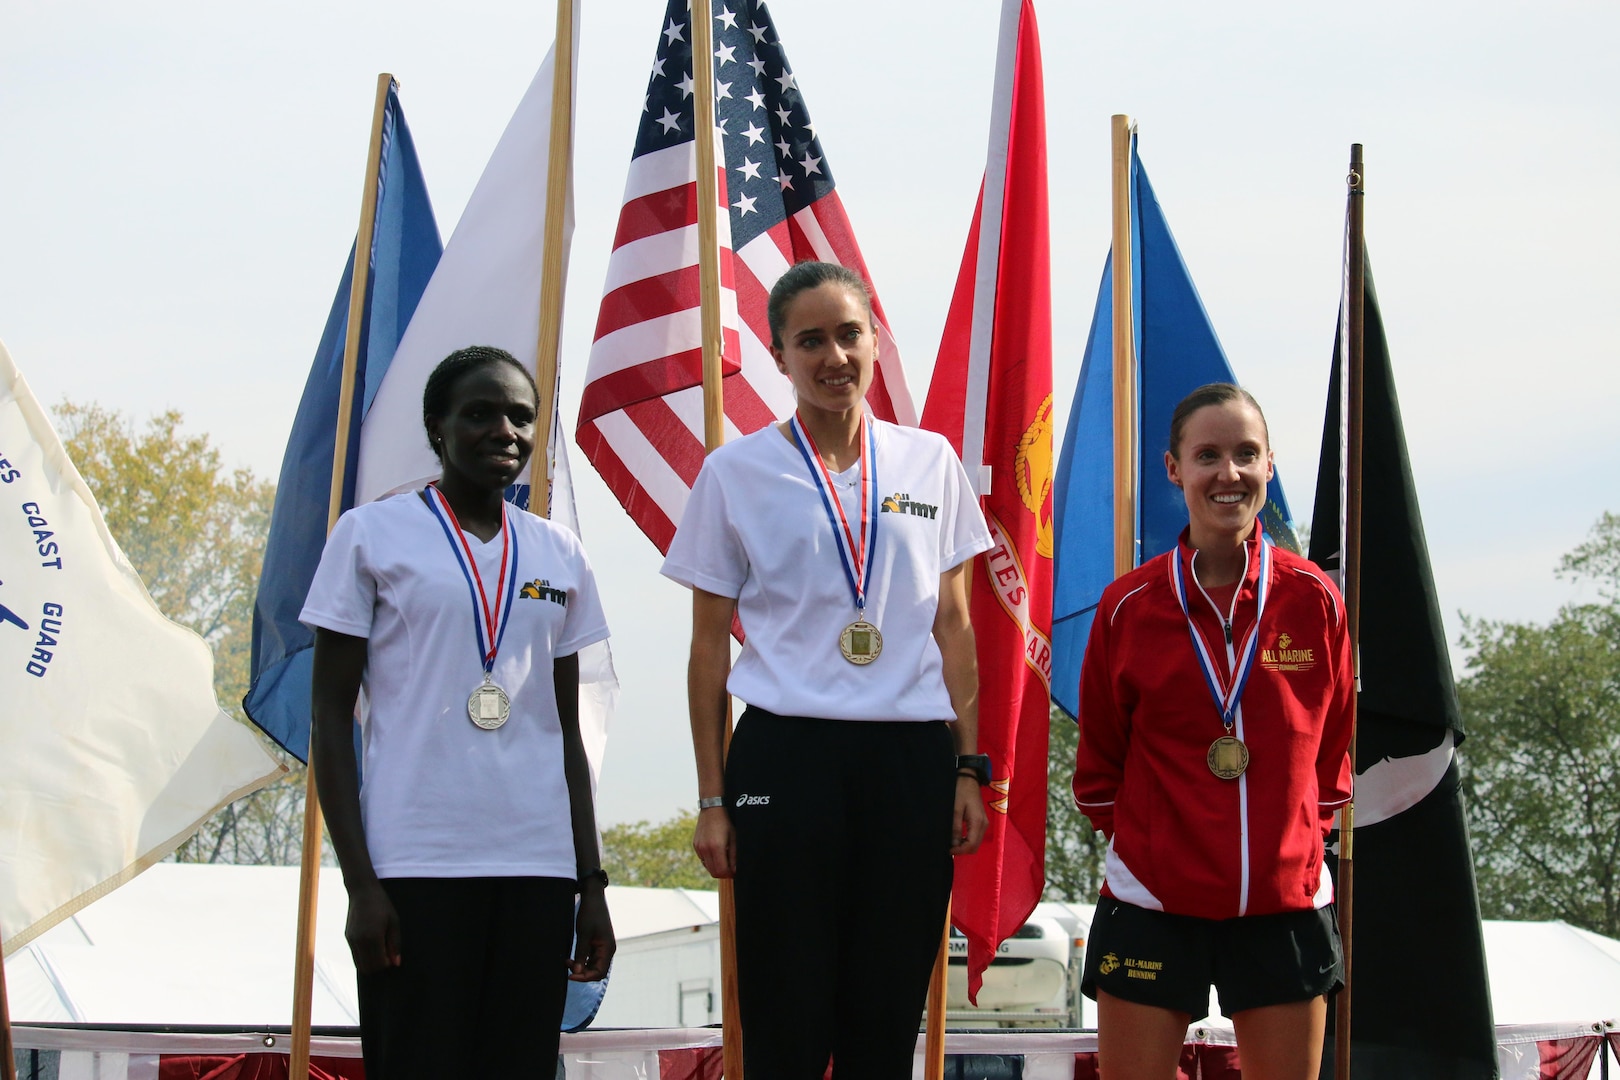 2nd Place: Pfc. Susan Tanui, Fort Riley, Kan. - 3:06:26 – Army; 1st Place: Capt Meghan Curran, Denver, Colo. - 2:53:19 – Army; 3rd Place: Capt Danielle Pozun, Camp Pendleton, Calif. - 3:07:23 – USMC. The 2016 Armed Forces Marathon is held in conjunction with the 41st Marine Corps Marathon on 30 October in Washington, D.C.